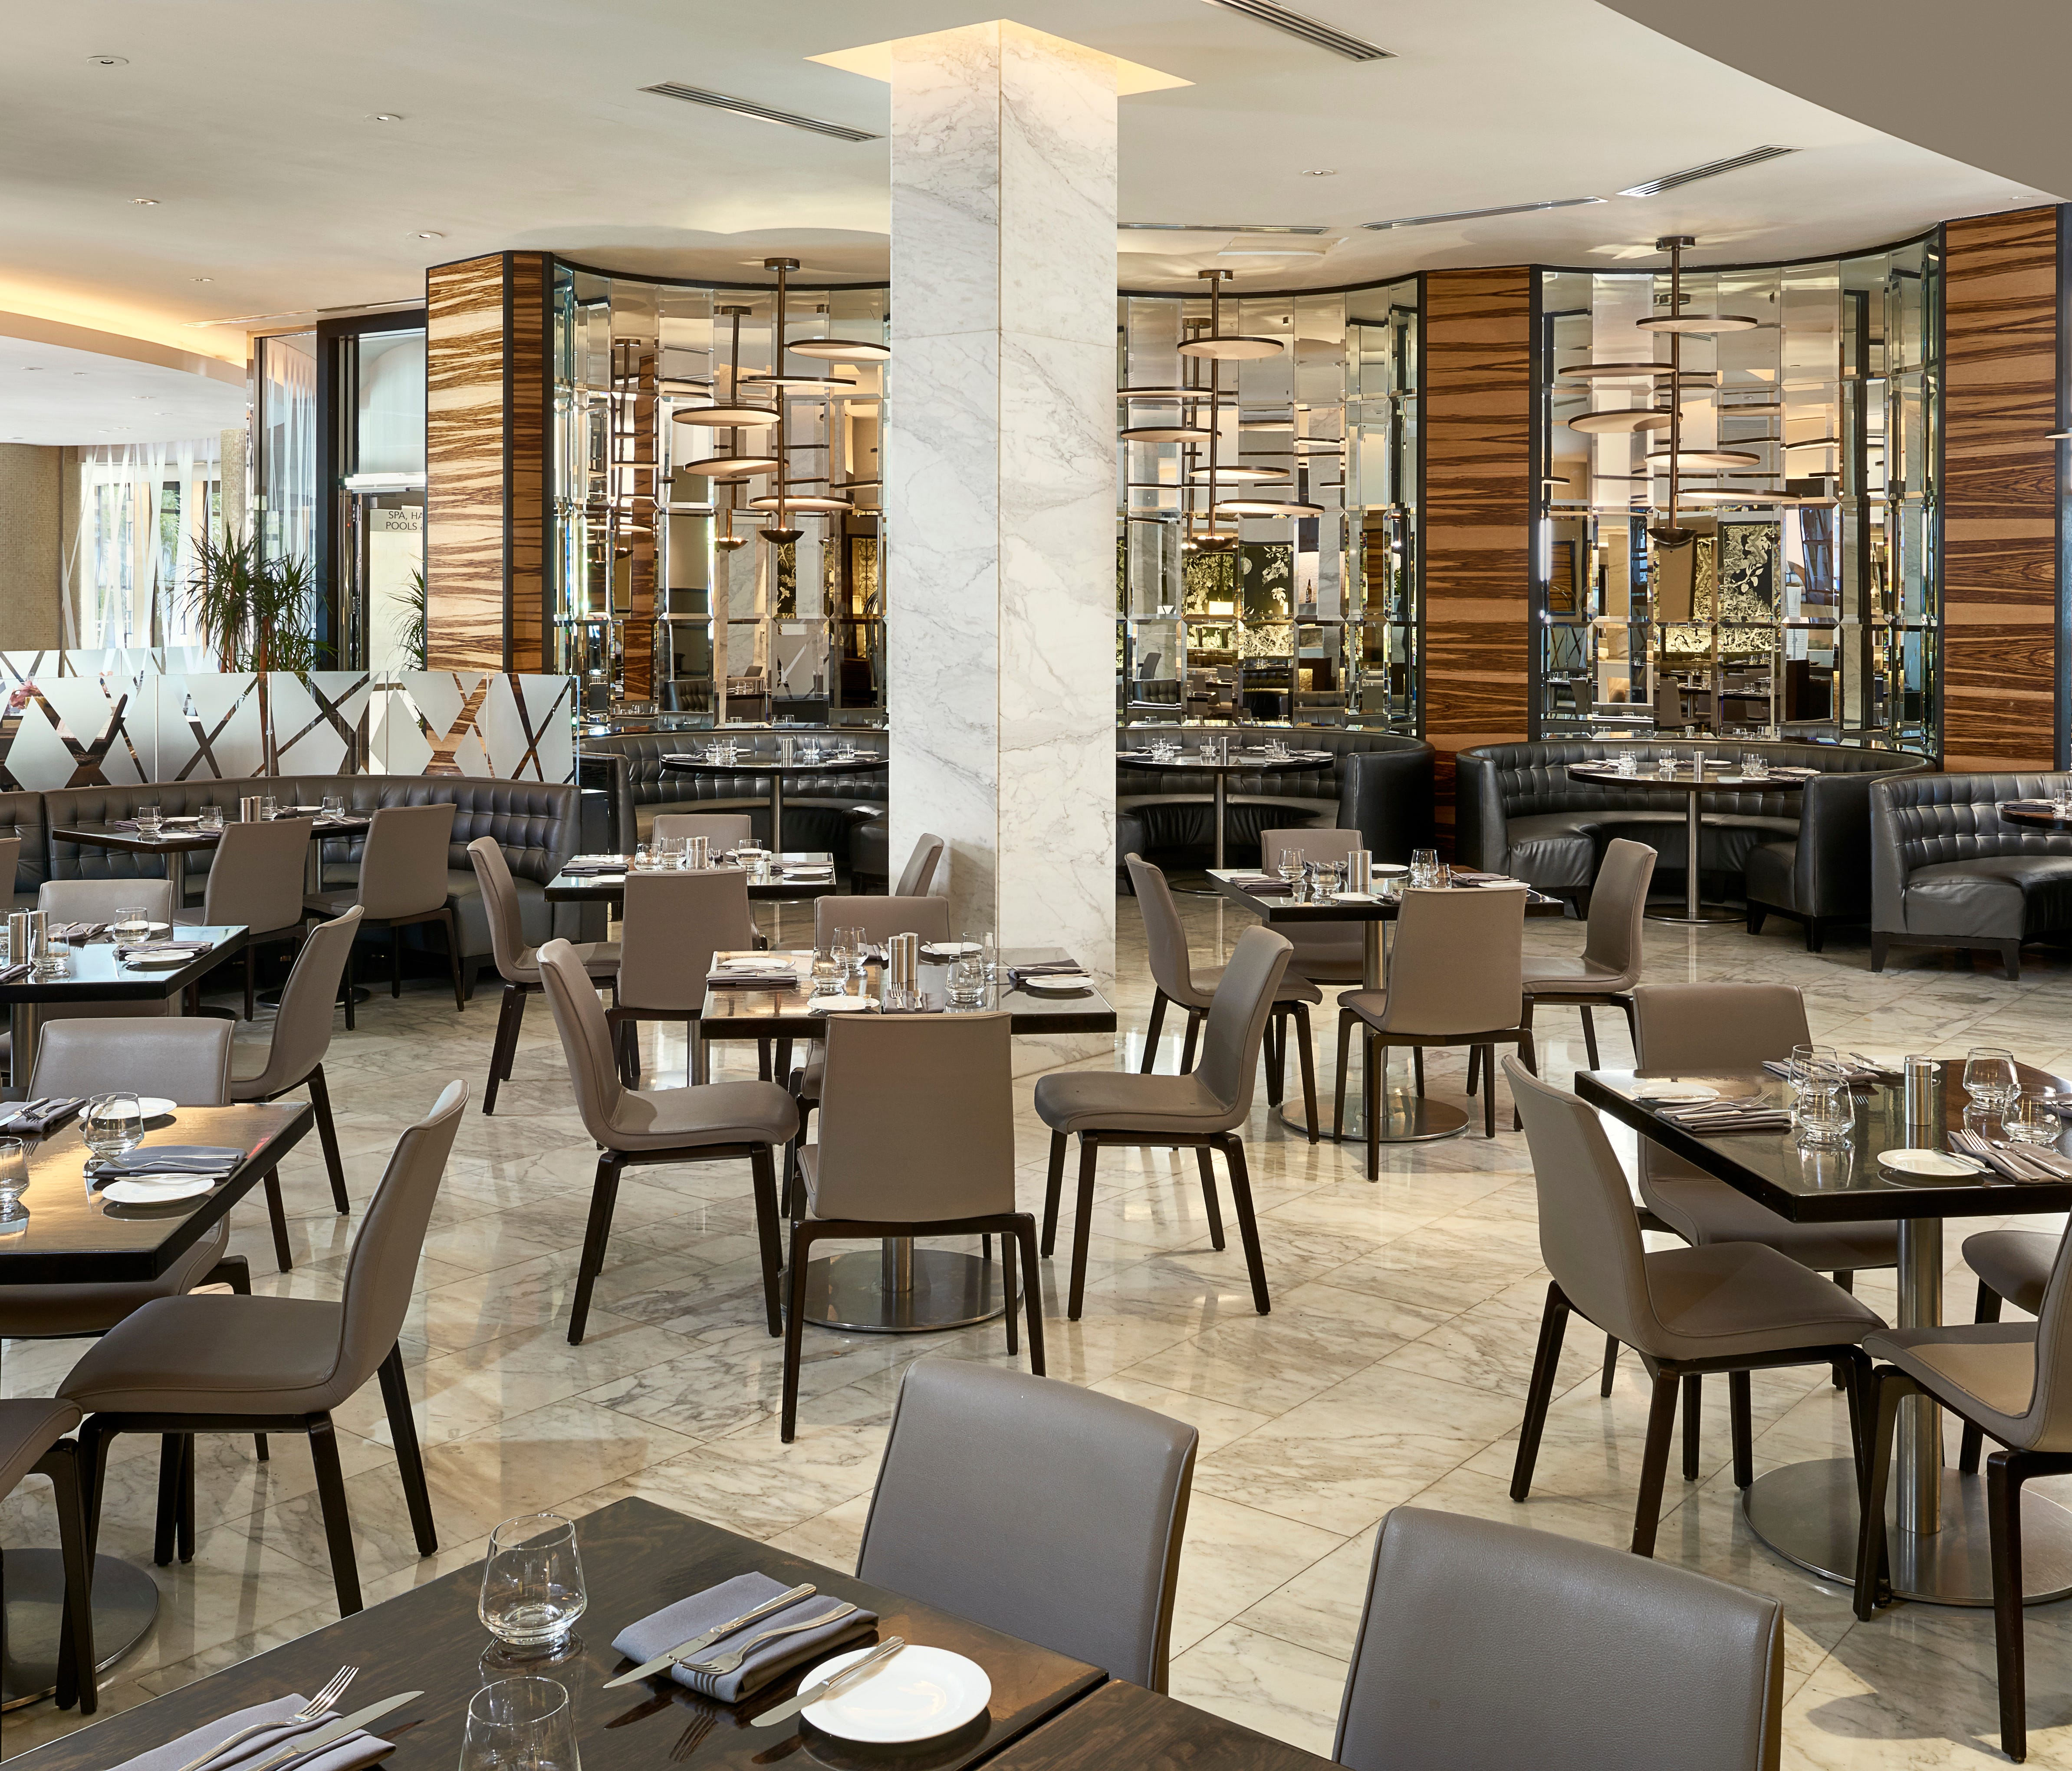 Luxury hotel Fontainebleau Miami Beach is offering 25% off stays of two nights or more with complimentary American breakfast for two at onsite Vida restaurant each morning. Fontainebleau is the home of award-winning dining such as Hakkasan, Scarpetta